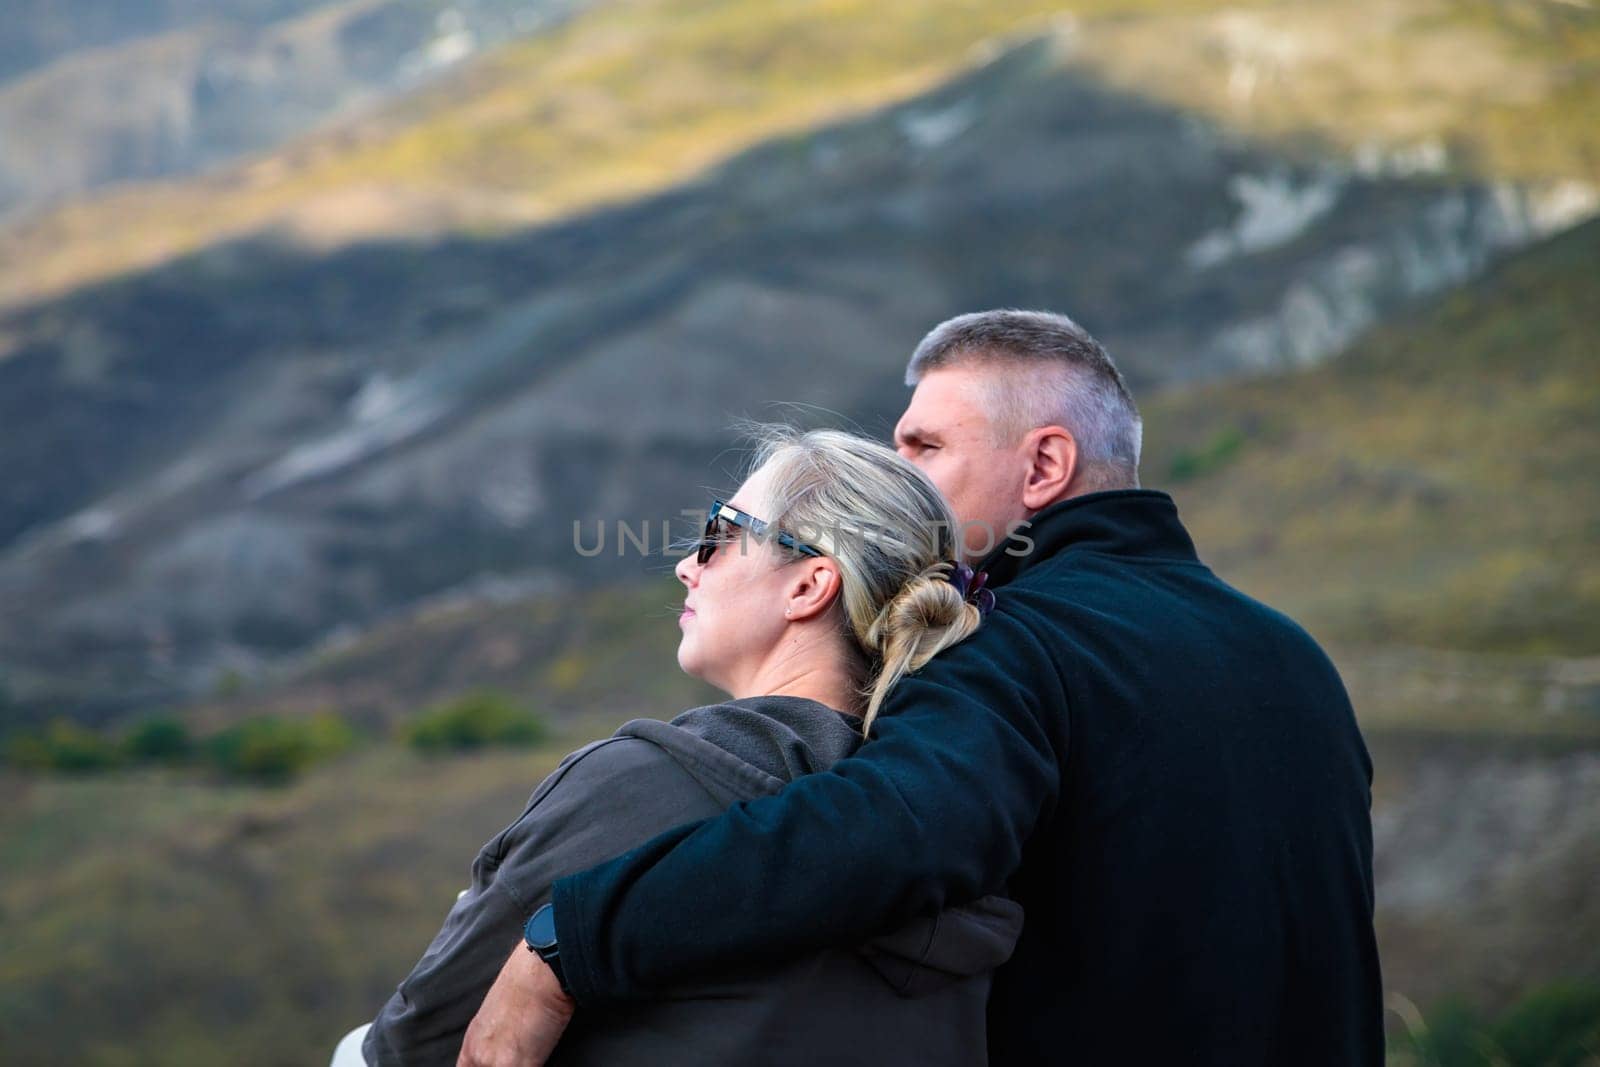 Couple in love with respect near mountain nature, hugging each other